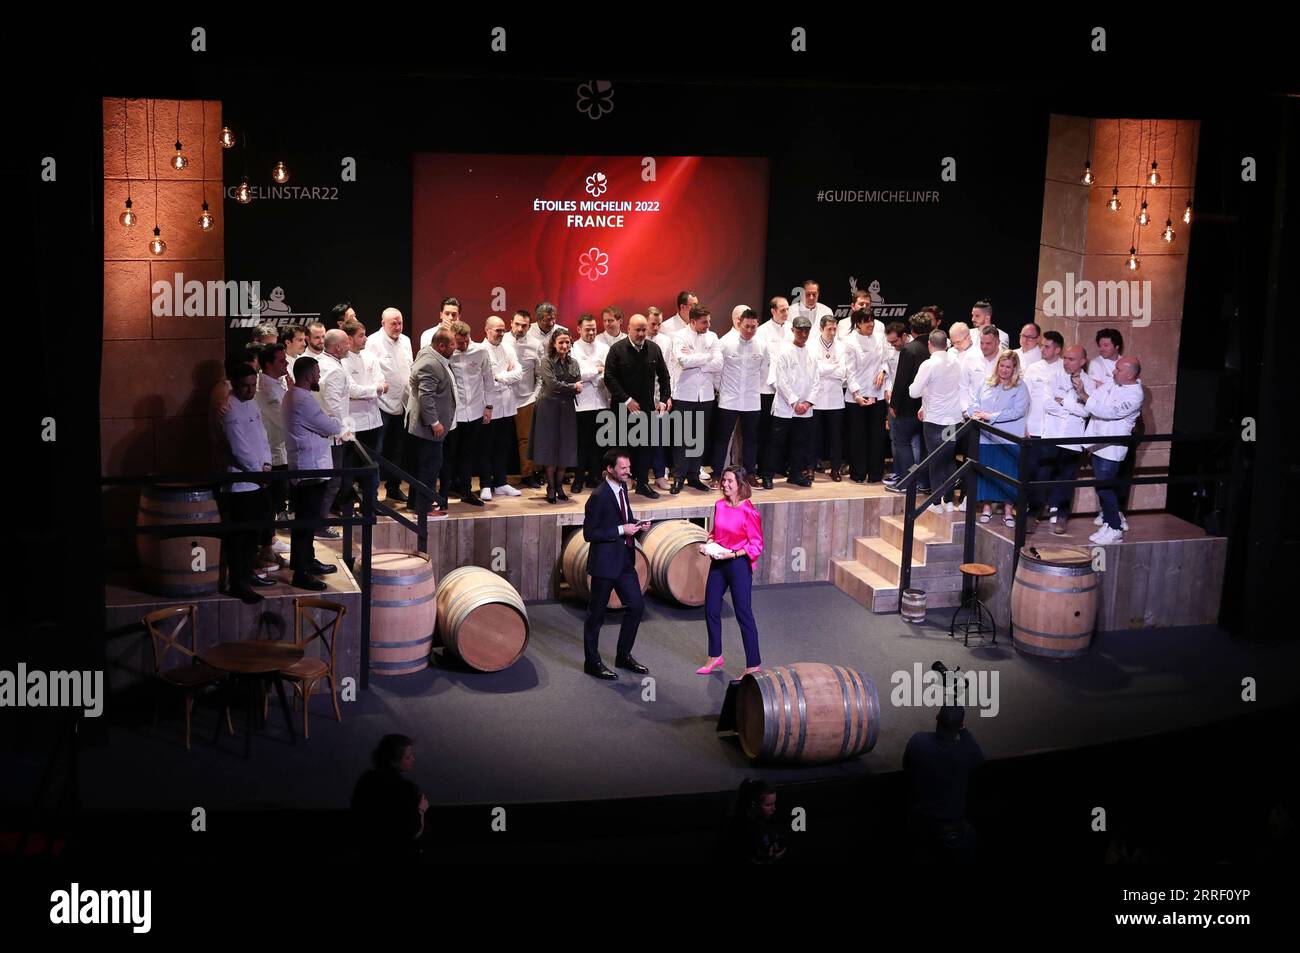 220323 -- COGNAC, March 23, 2022 -- Chefs celebrate after being awarded a first Michelin star during the 2022 edition of the Michelin Guide award ceremony in Cognac, France, March 22, 2022. The Michelin Guide launched its 2022 edition on Tuesday in Cognac, the first time in its 122 years the ceremony has taken place outside Paris. Two restaurants were awarded the highest distinction of three stars.  FRANCE-COGNAC-MICHELIN GUIDE-AWARD CEREMONY GaoxJing PUBLICATIONxNOTxINxCHN Stock Photo